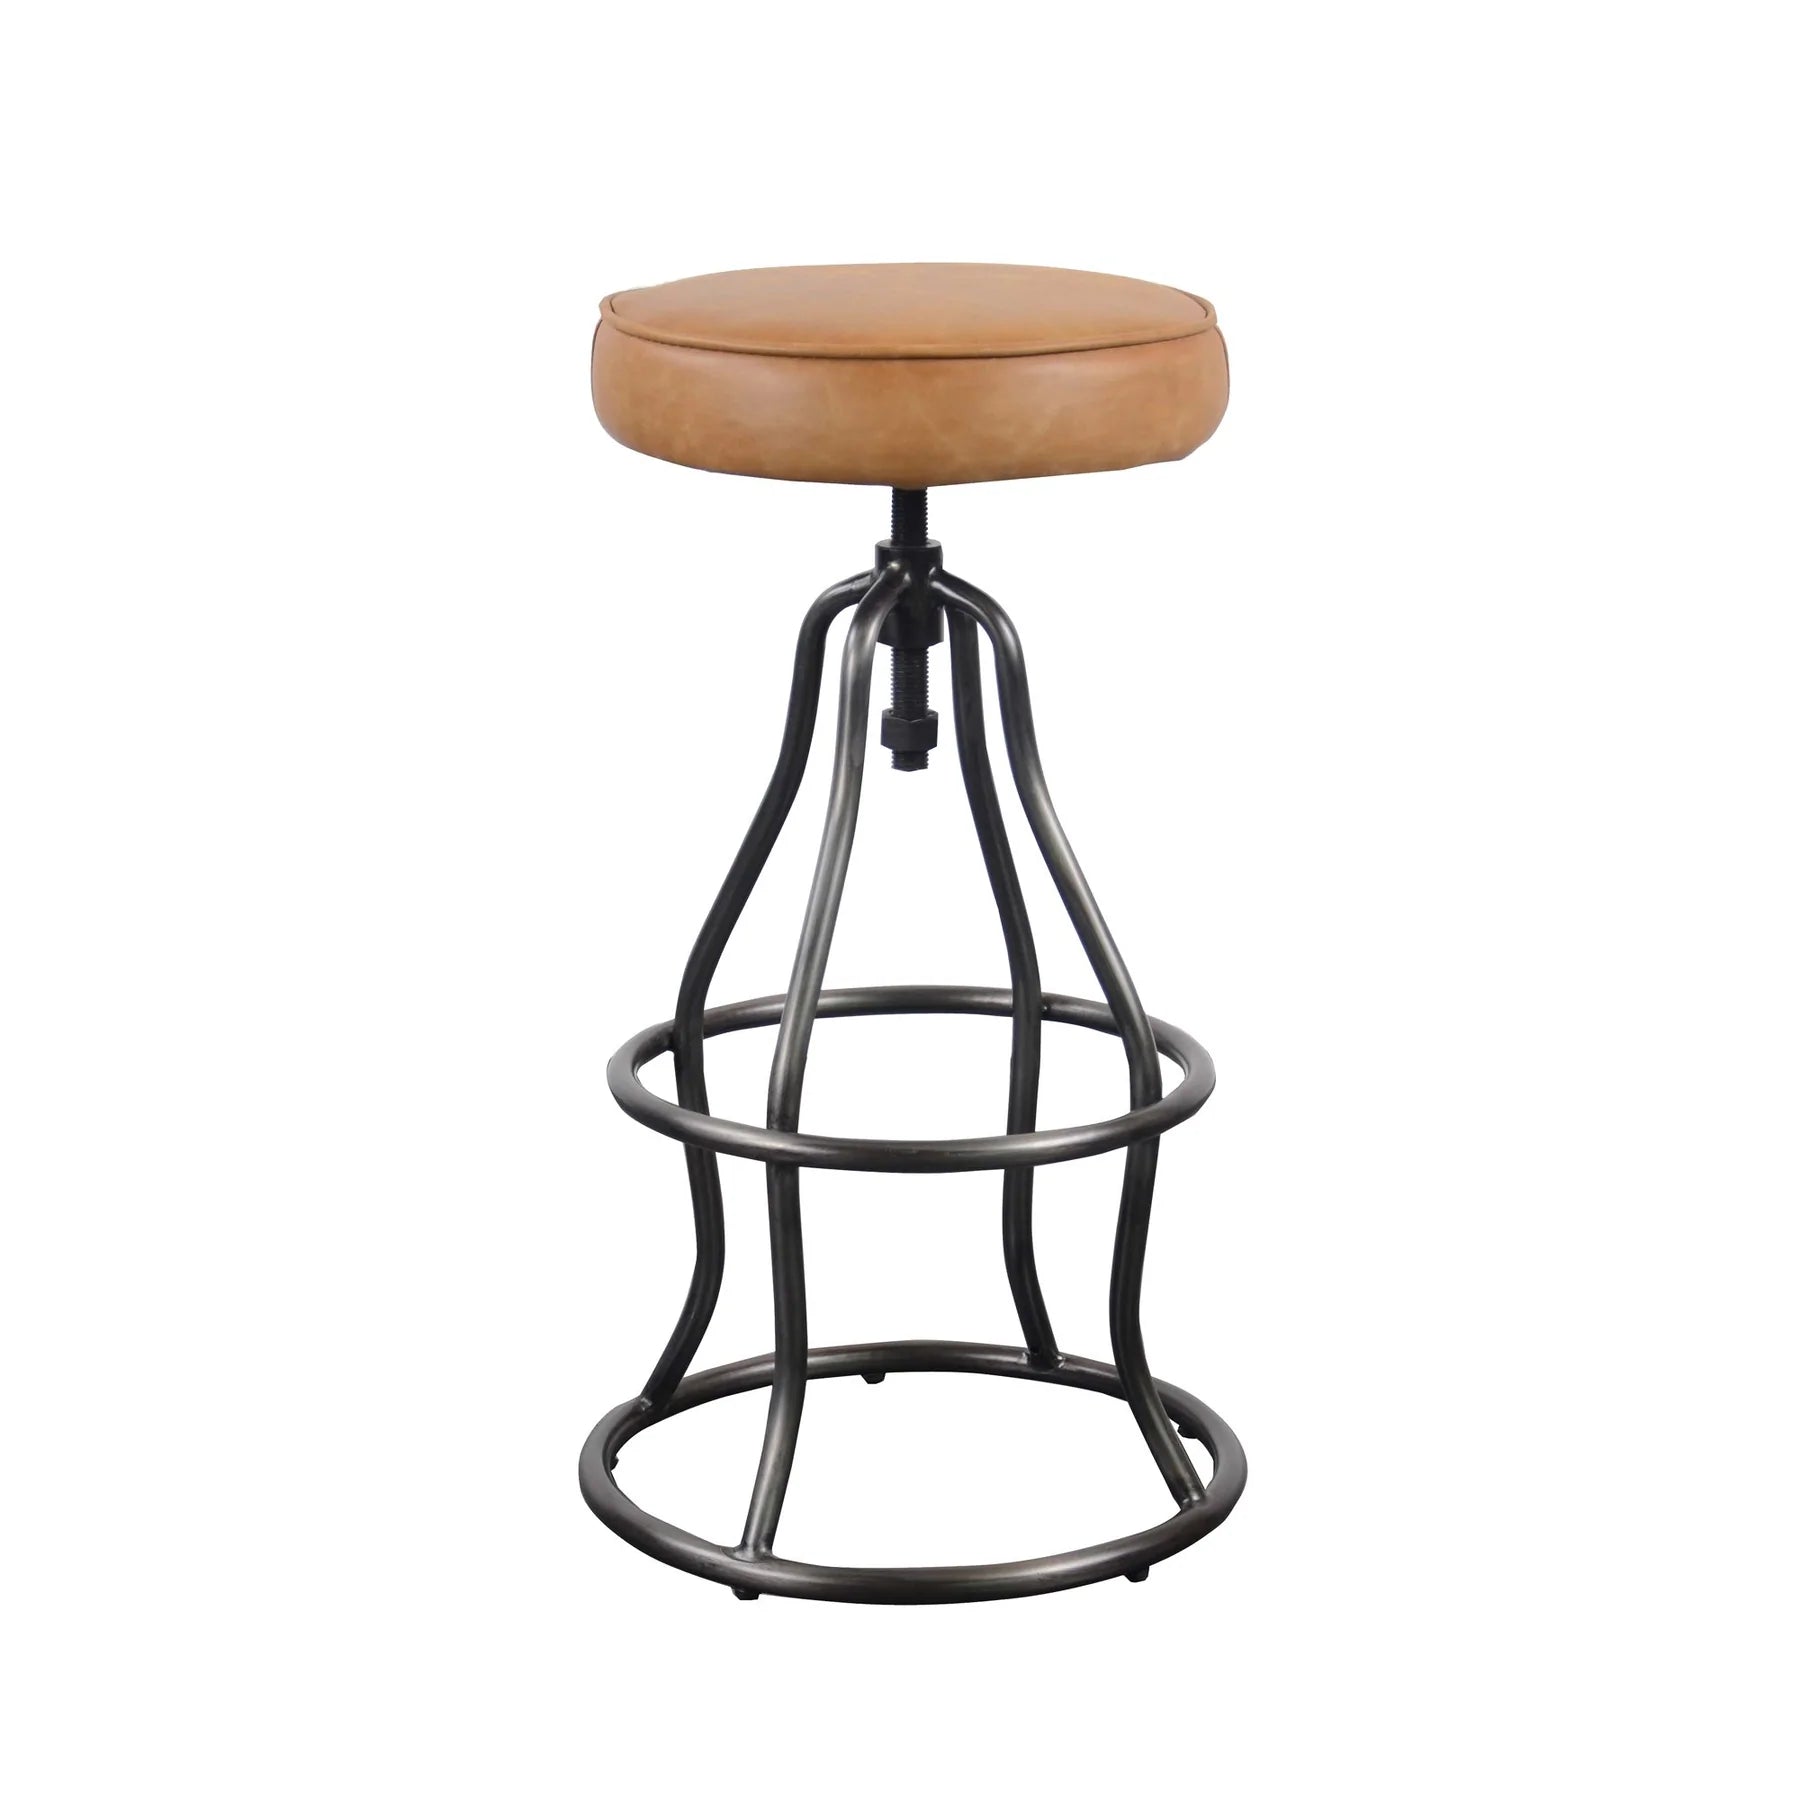 Bowie Counter/Bar Stool Distressed Tan Leather